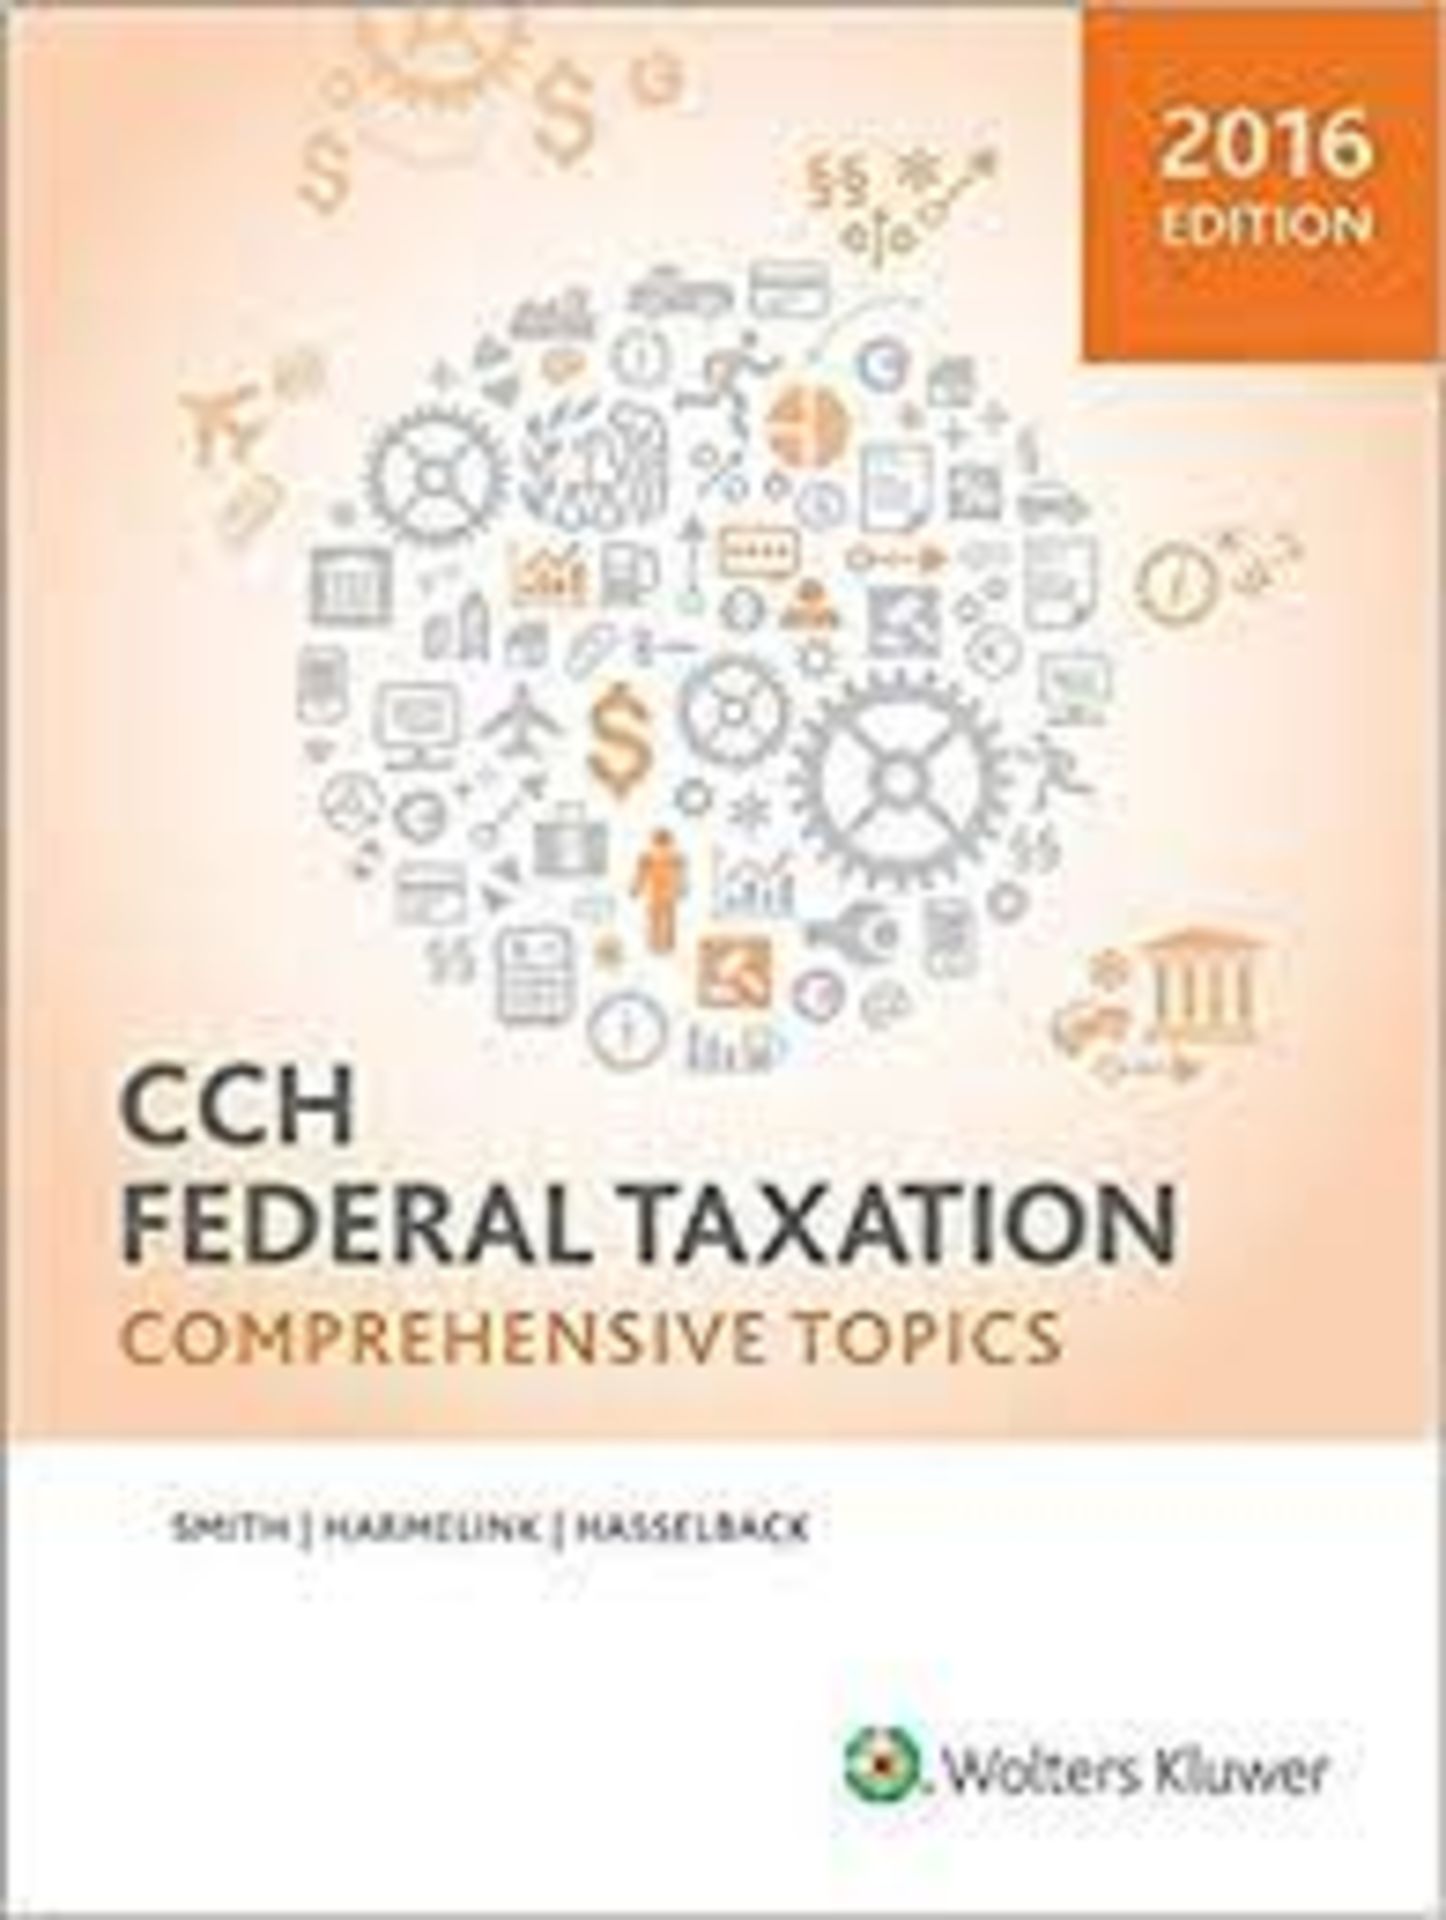 RRP £226 Federal Taxation 2016: Comprehensive Topics spW50G4509d (LM)